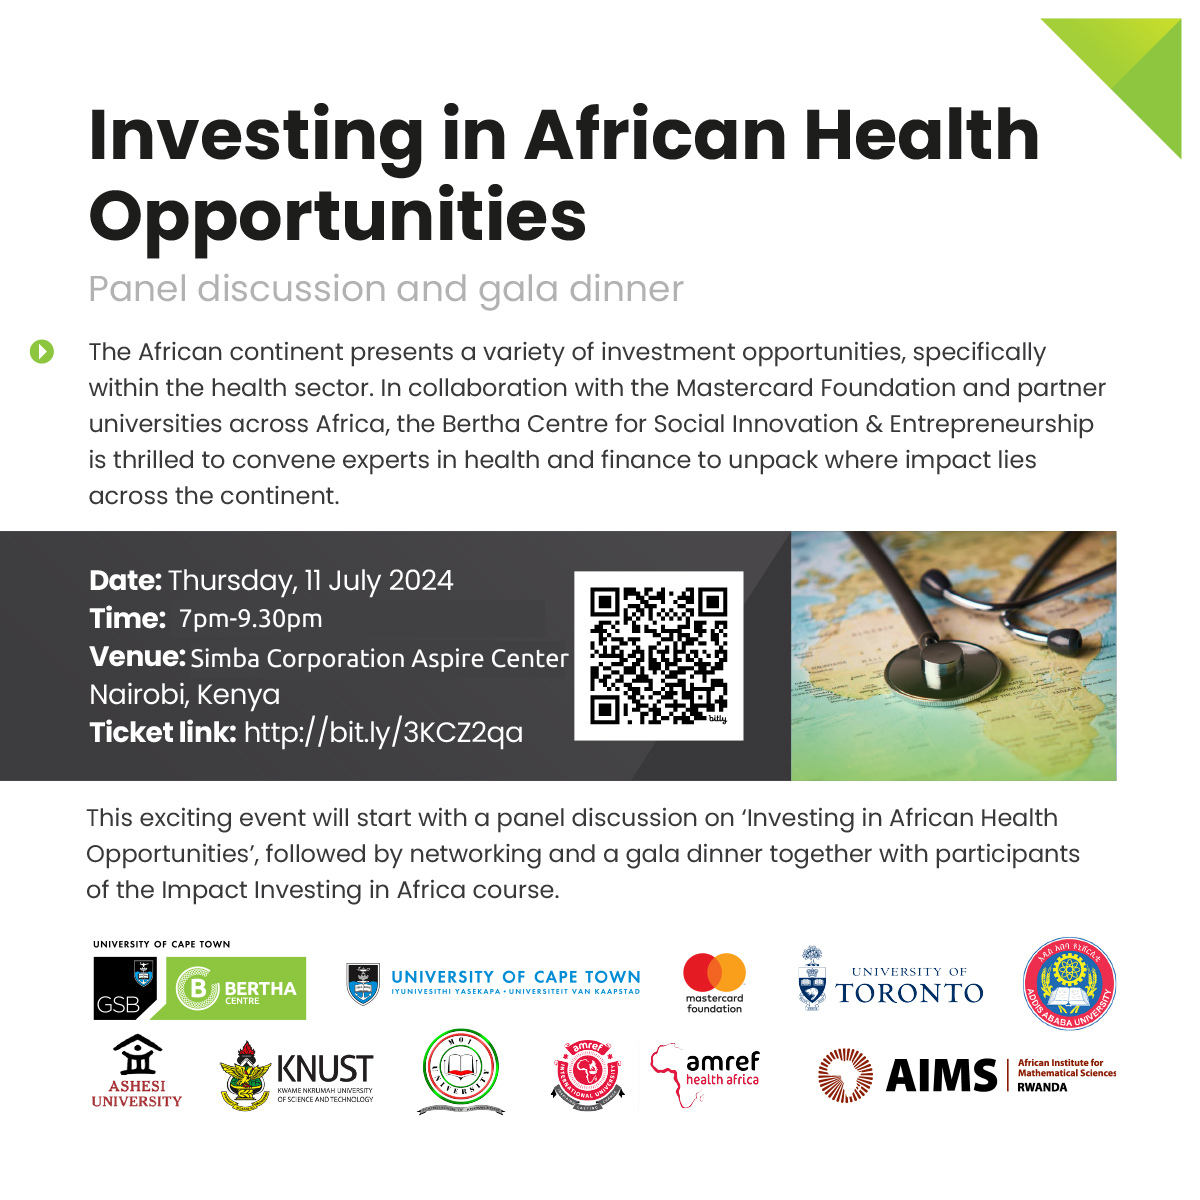 Investing in African Health Opportunities